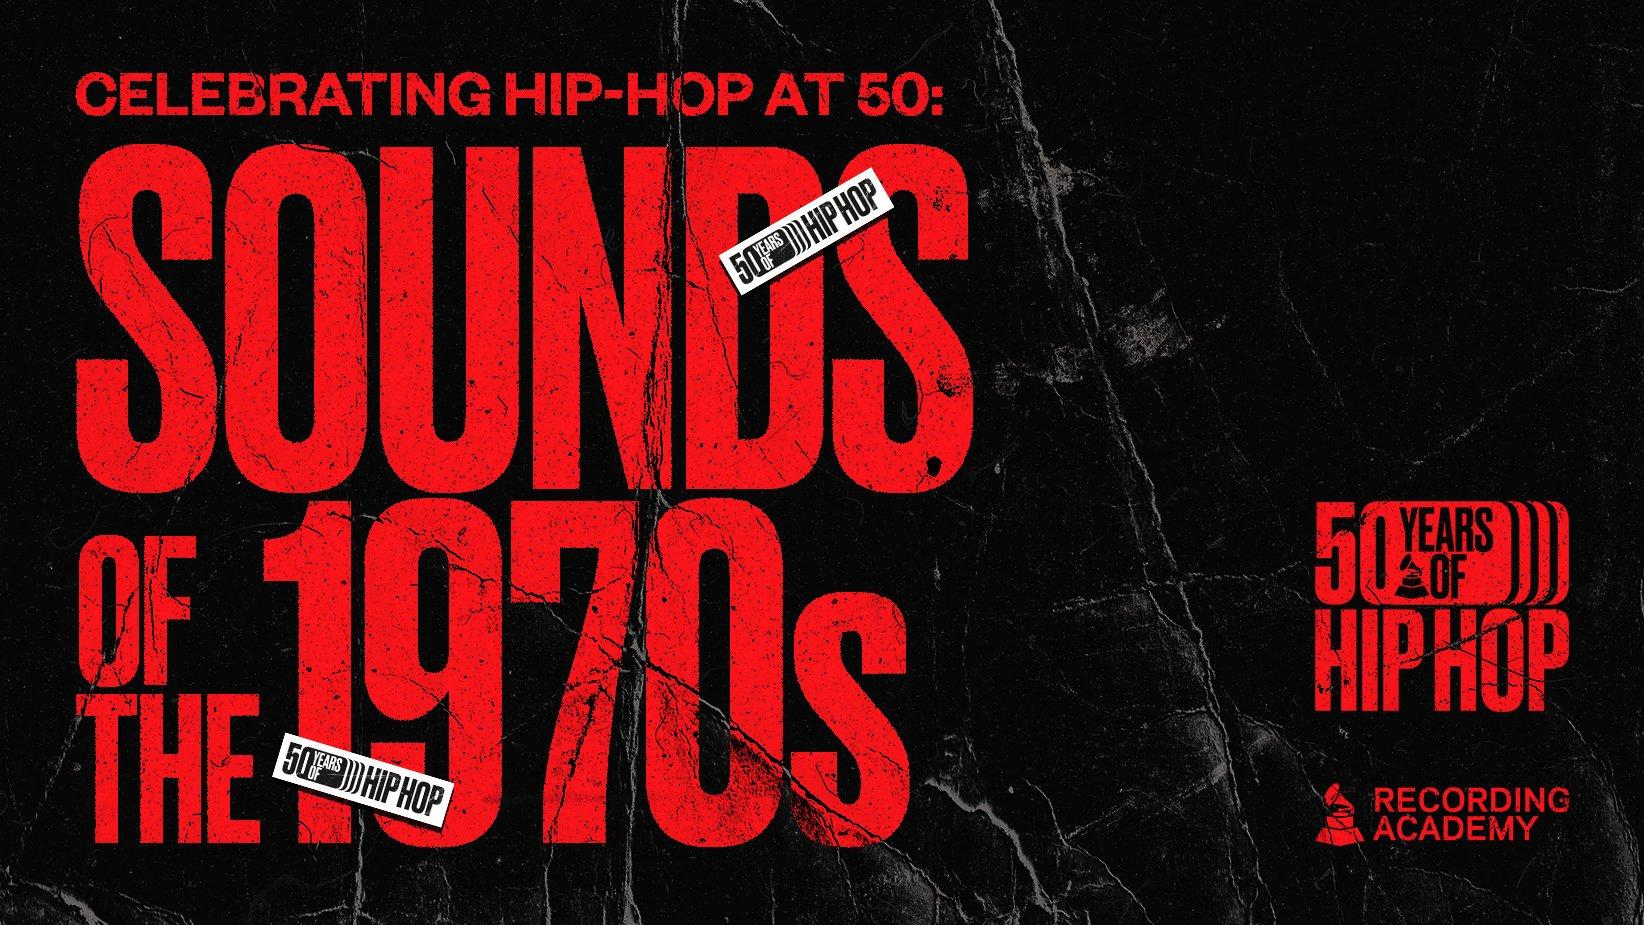 Essential Hip-Hop Releases From The 1970s album covers